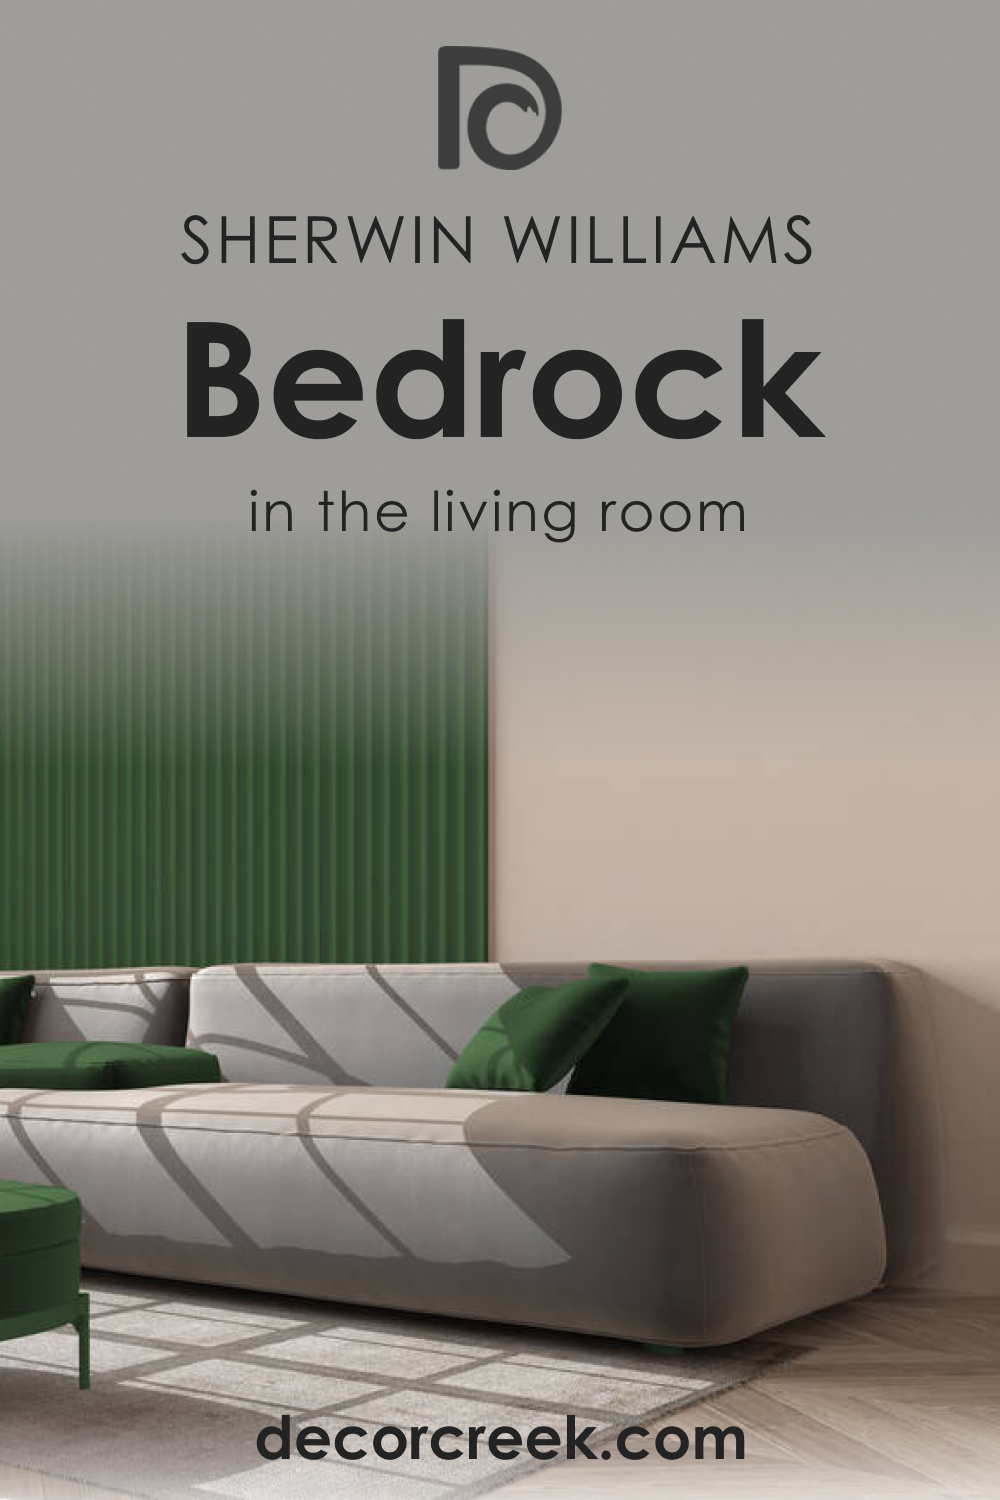 How to Use SW 9563 Bedrock in the Living Room?